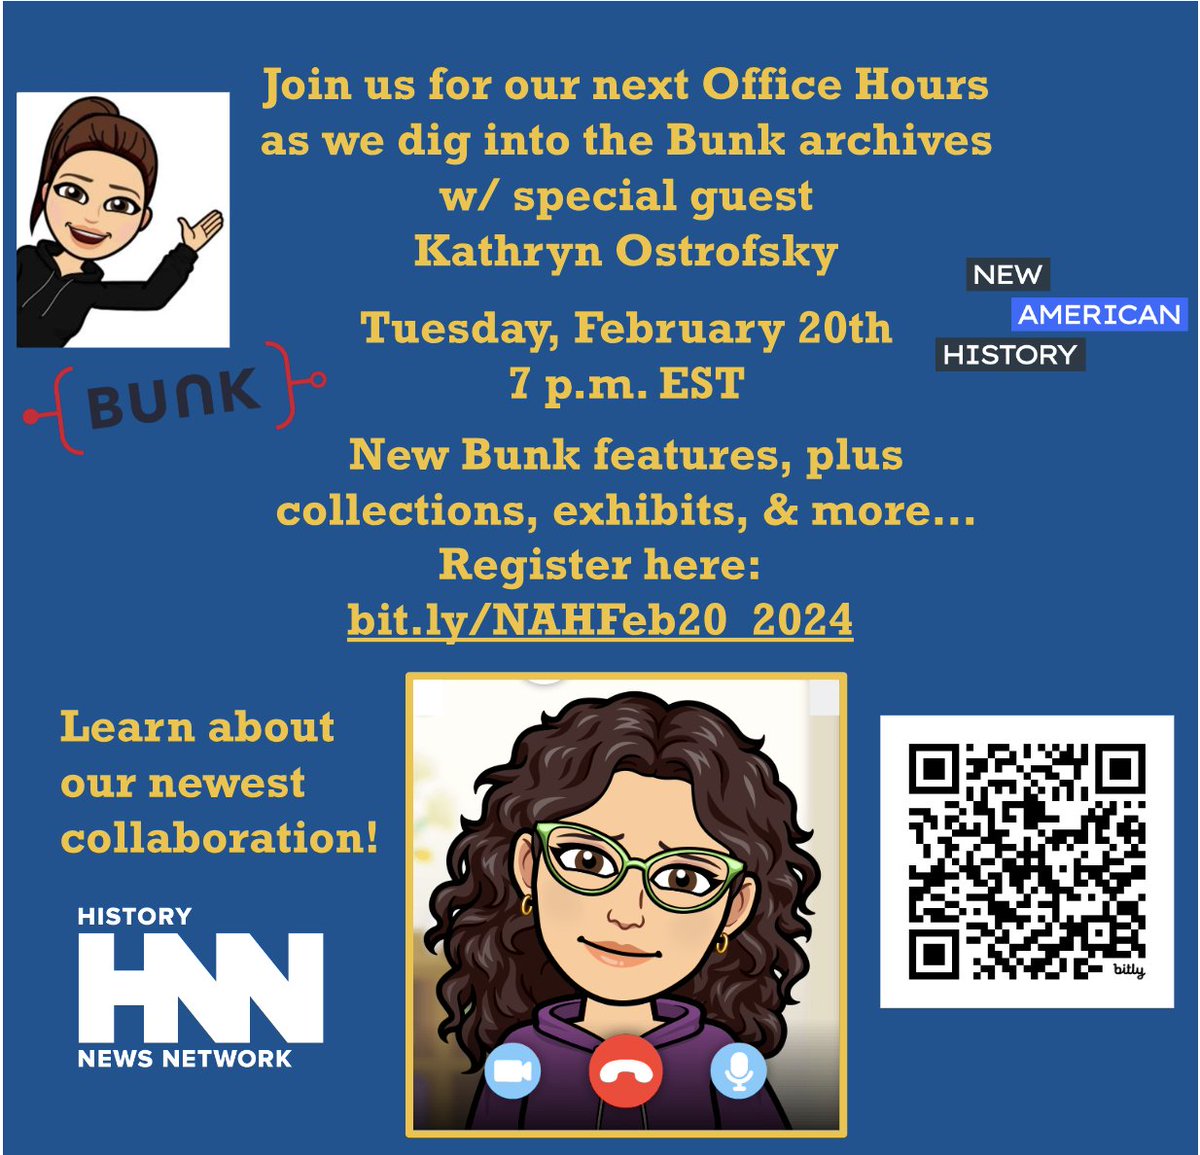 #APUSH and @NationalHistory students - have a question to ask an archivist? Join us tonight! New American History Office Hours: Archives Edition! Tues. Feb. 20th at 7 pm EST w/ our Bunk Archivist, @K_Ostrofsky Preregistration is required, bring ??s ... bit.ly/NAHFeb20_2024